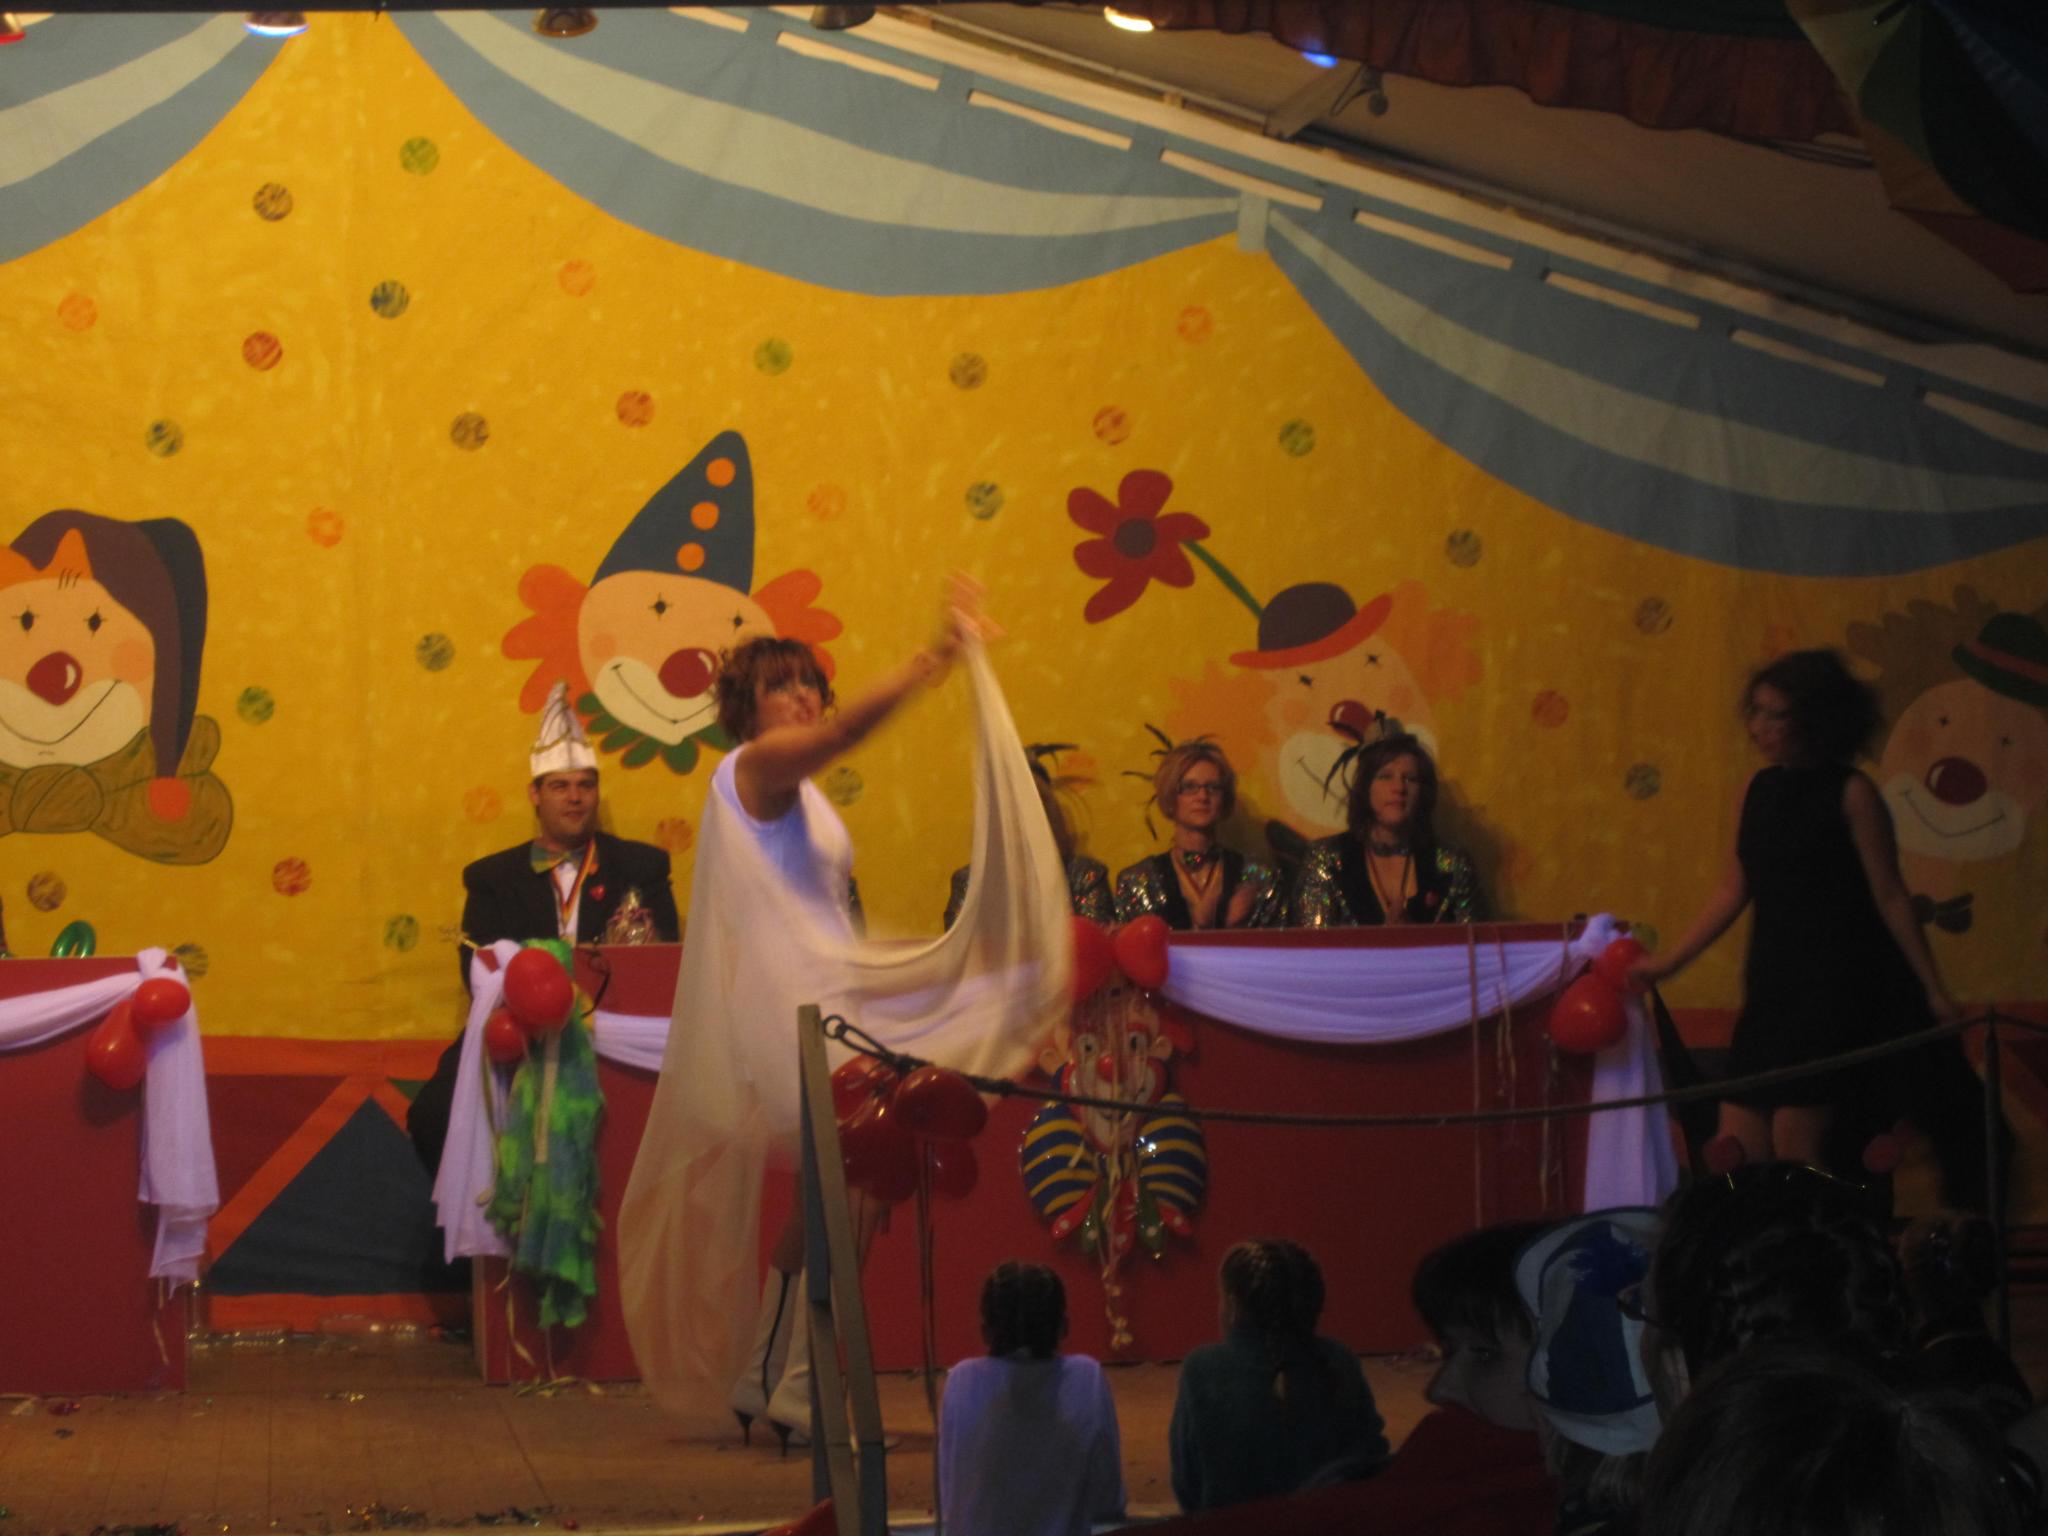 a group of people in a circus setting